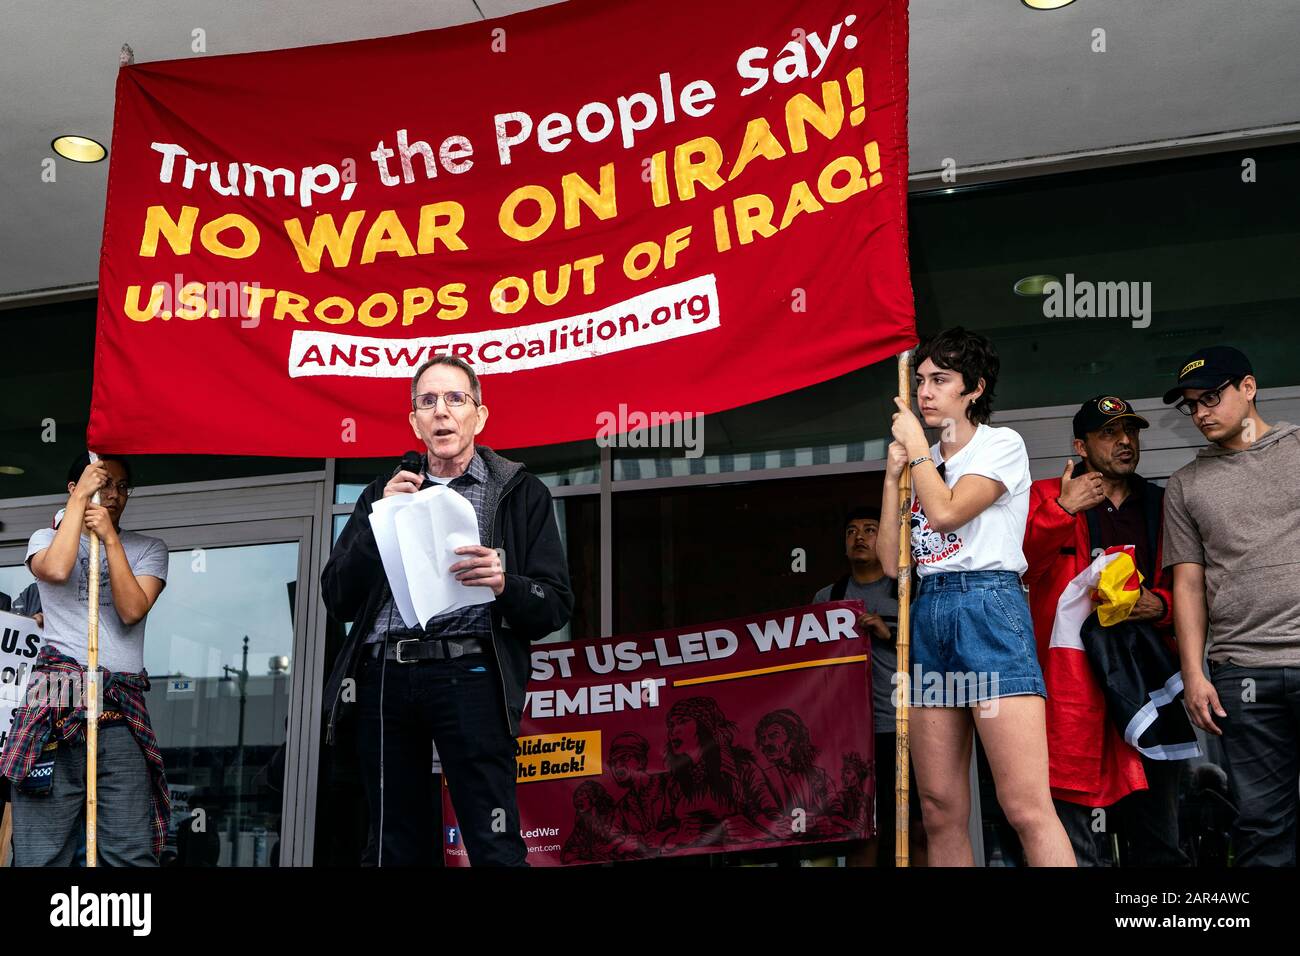 Protesters hold a banner during the demonstration.No War in Iran protest against the Trump Administration’s military actions and economic sanctions against Iran. Organizers called on Trump to withdraw U.S. troops from Iraq and not to drag the U.S. into a war in the Middle East. Stock Photo